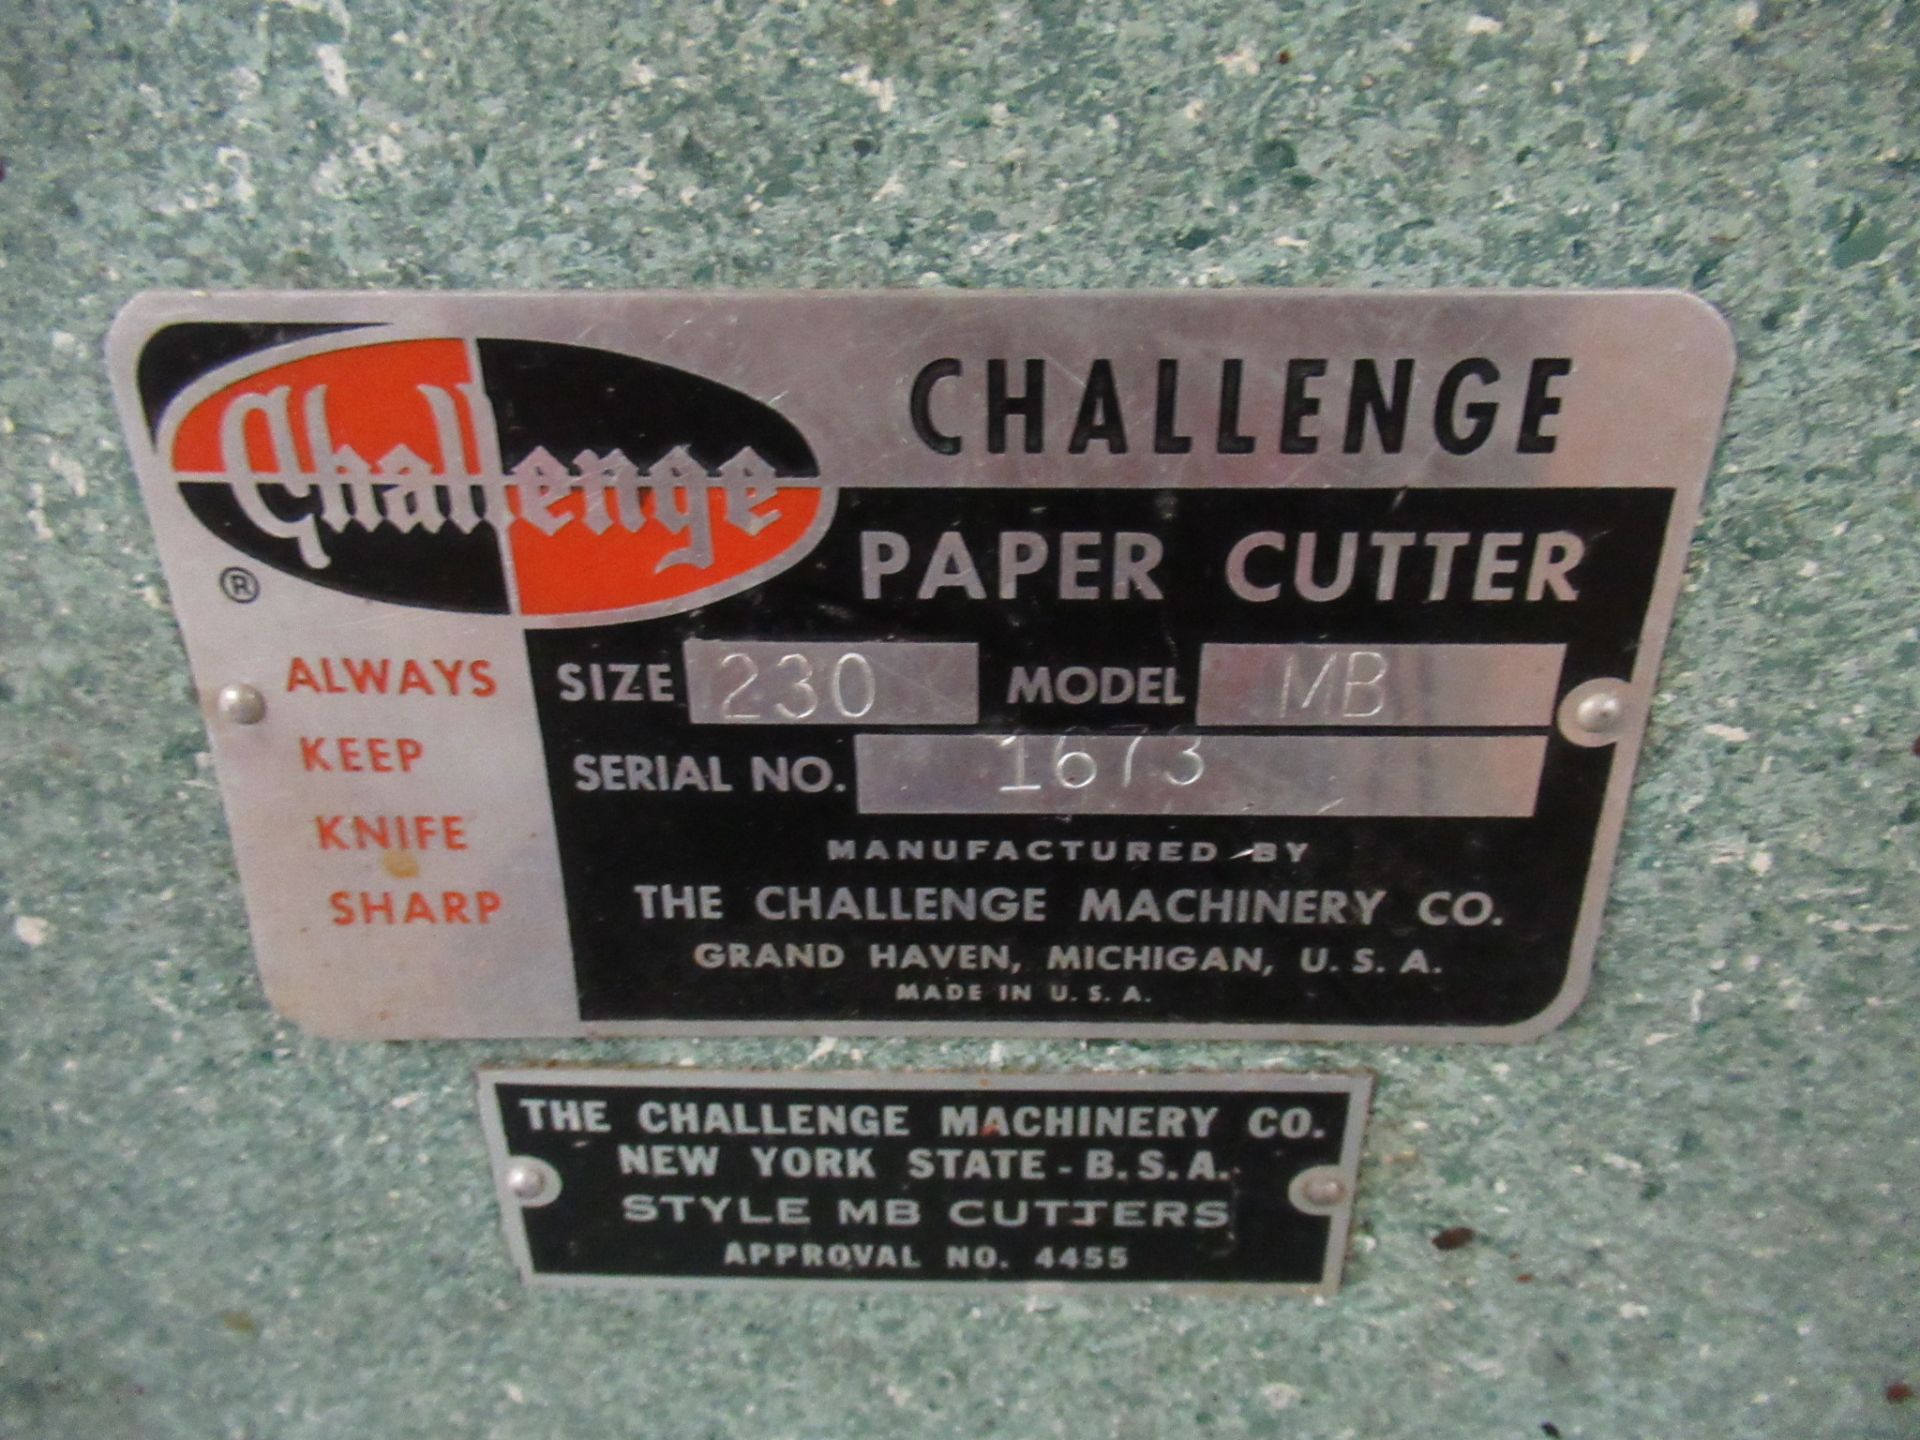 Challenge Model MB Electric Paper Cutter, Size 230, s/n 1673, 23” Cutting Blade - Image 4 of 6